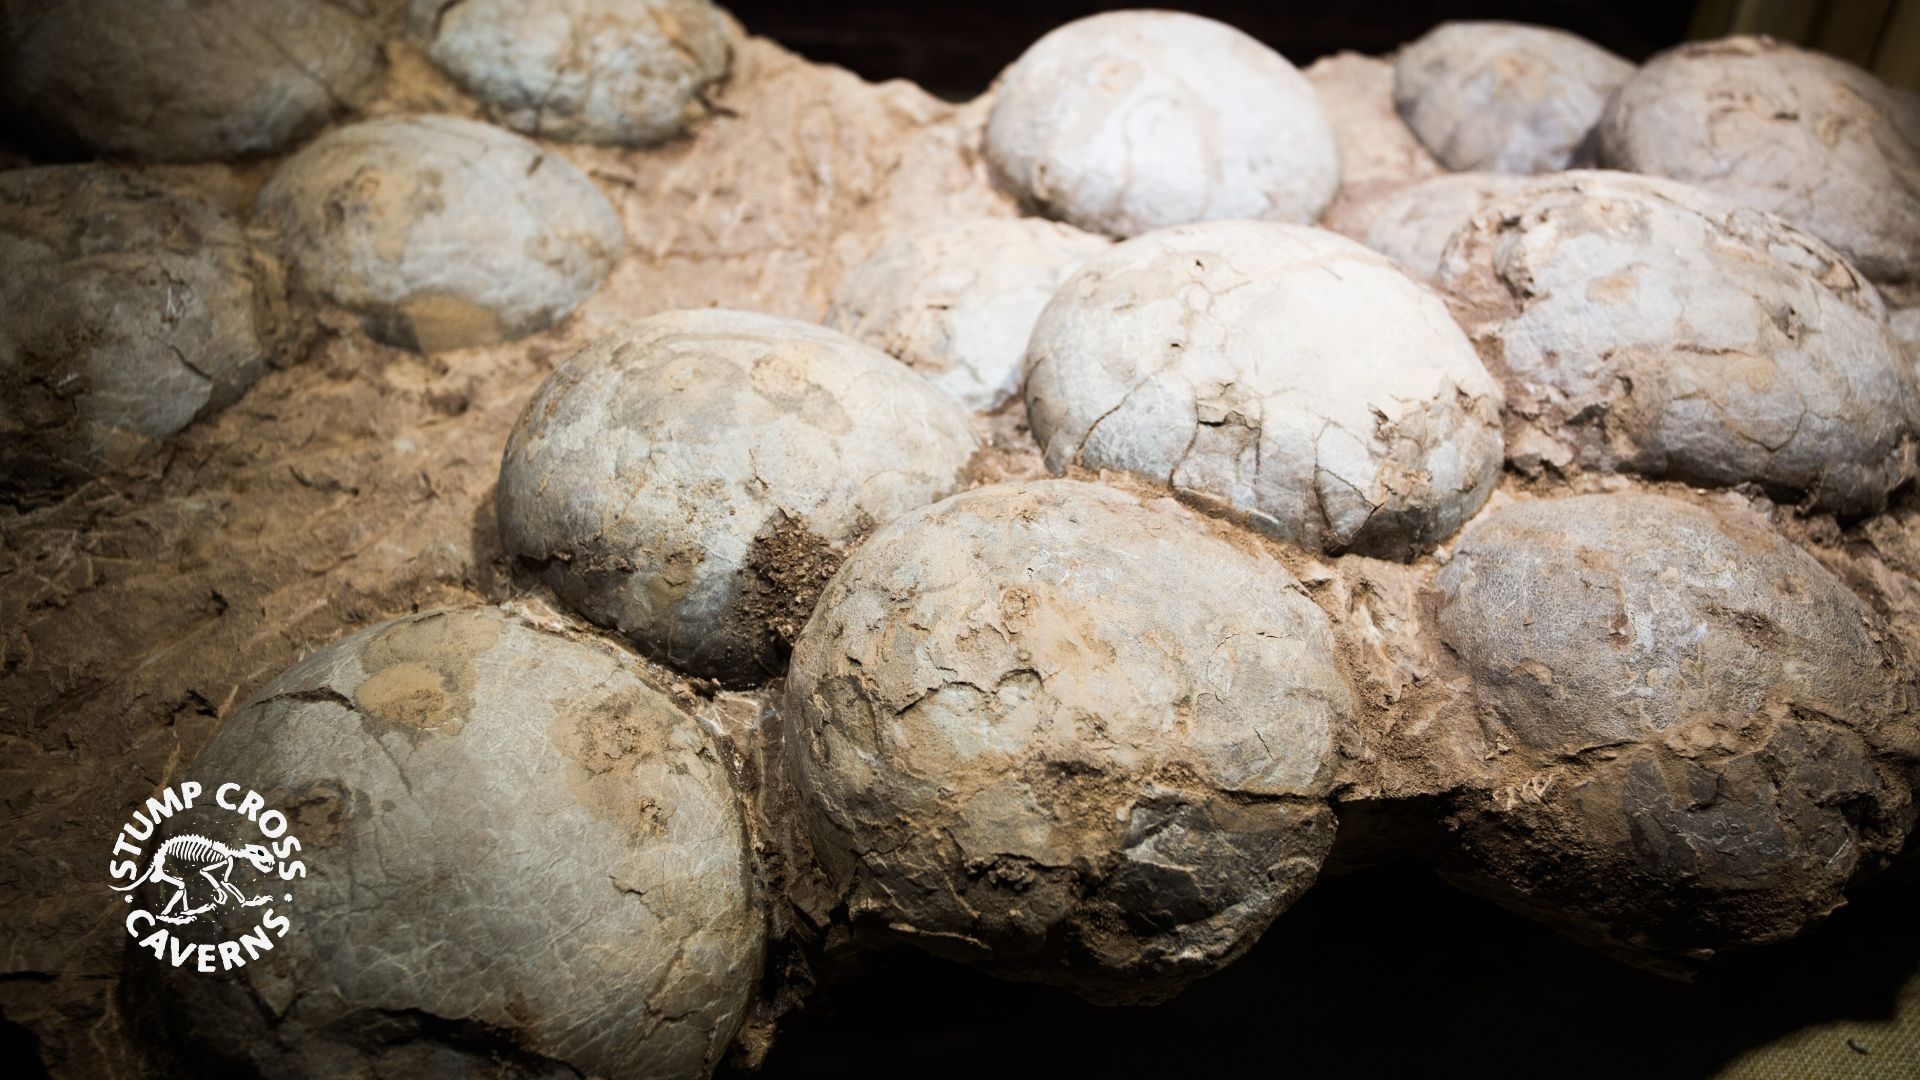 At Stump Cross Caverns, we're mad about geology. Learn about the time we got a dinosaur egg scanned.